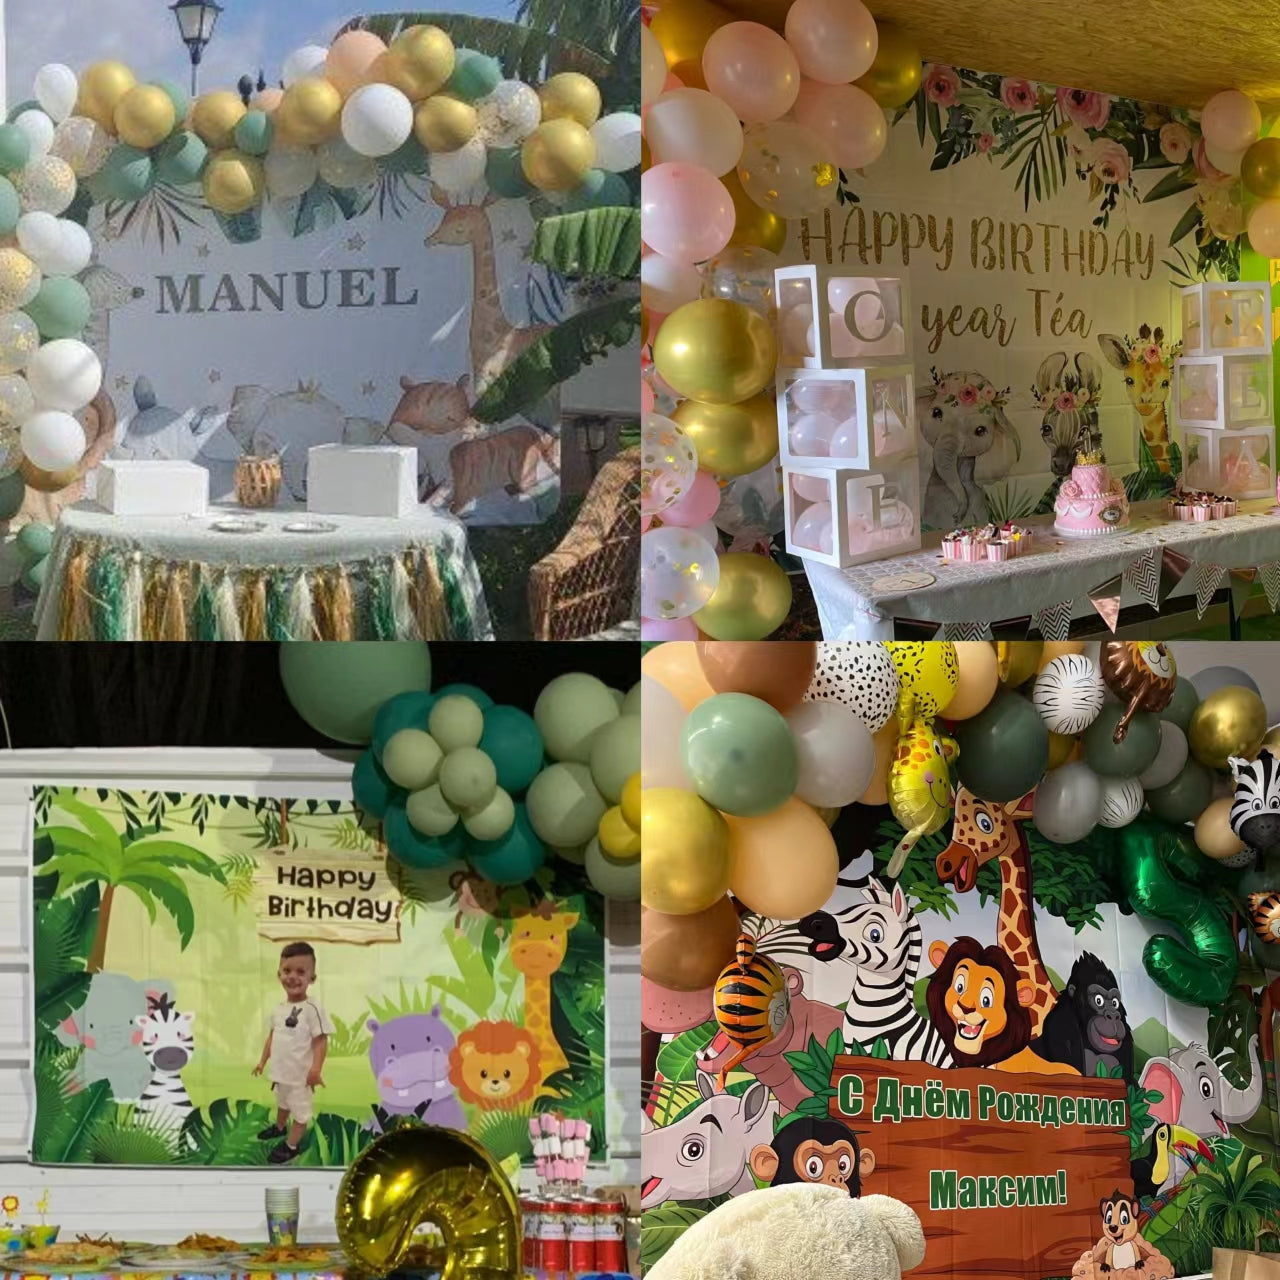 A Little Wild One Is On The Way Birthday Backdrop Banner